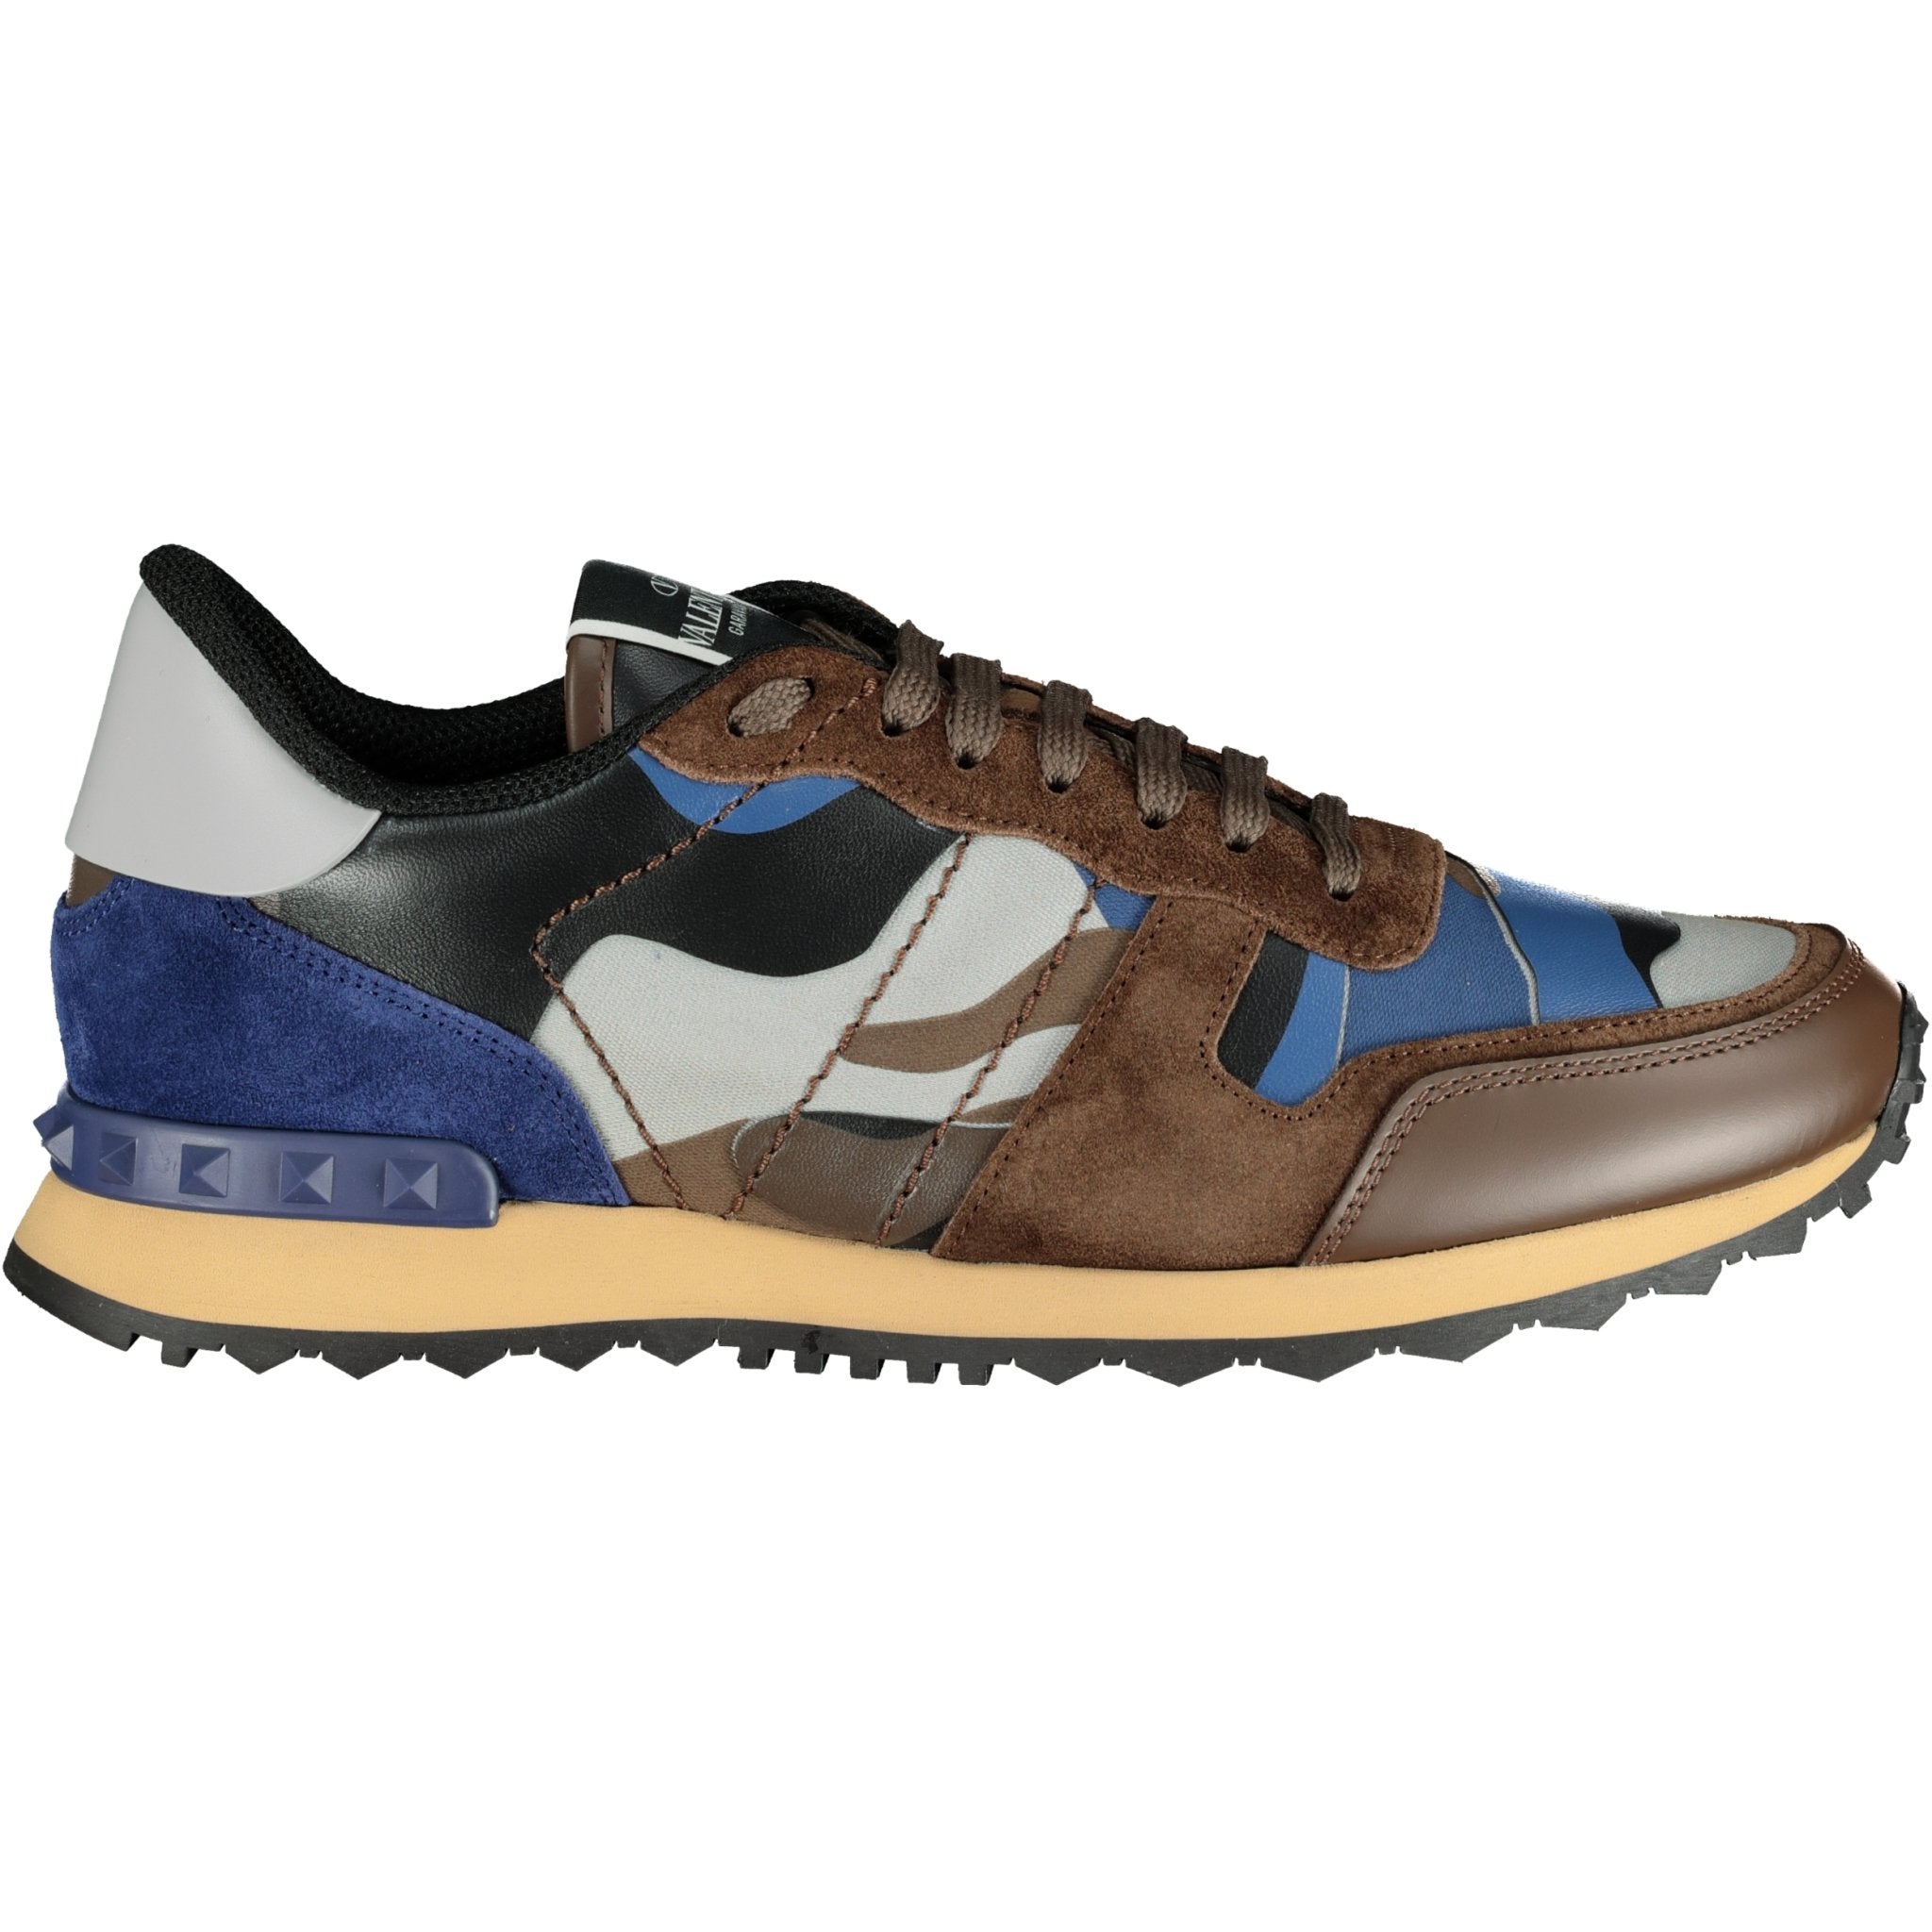 Valentino Brown & Rockrunner Trainers | Boinclo ltd Outlet Sale